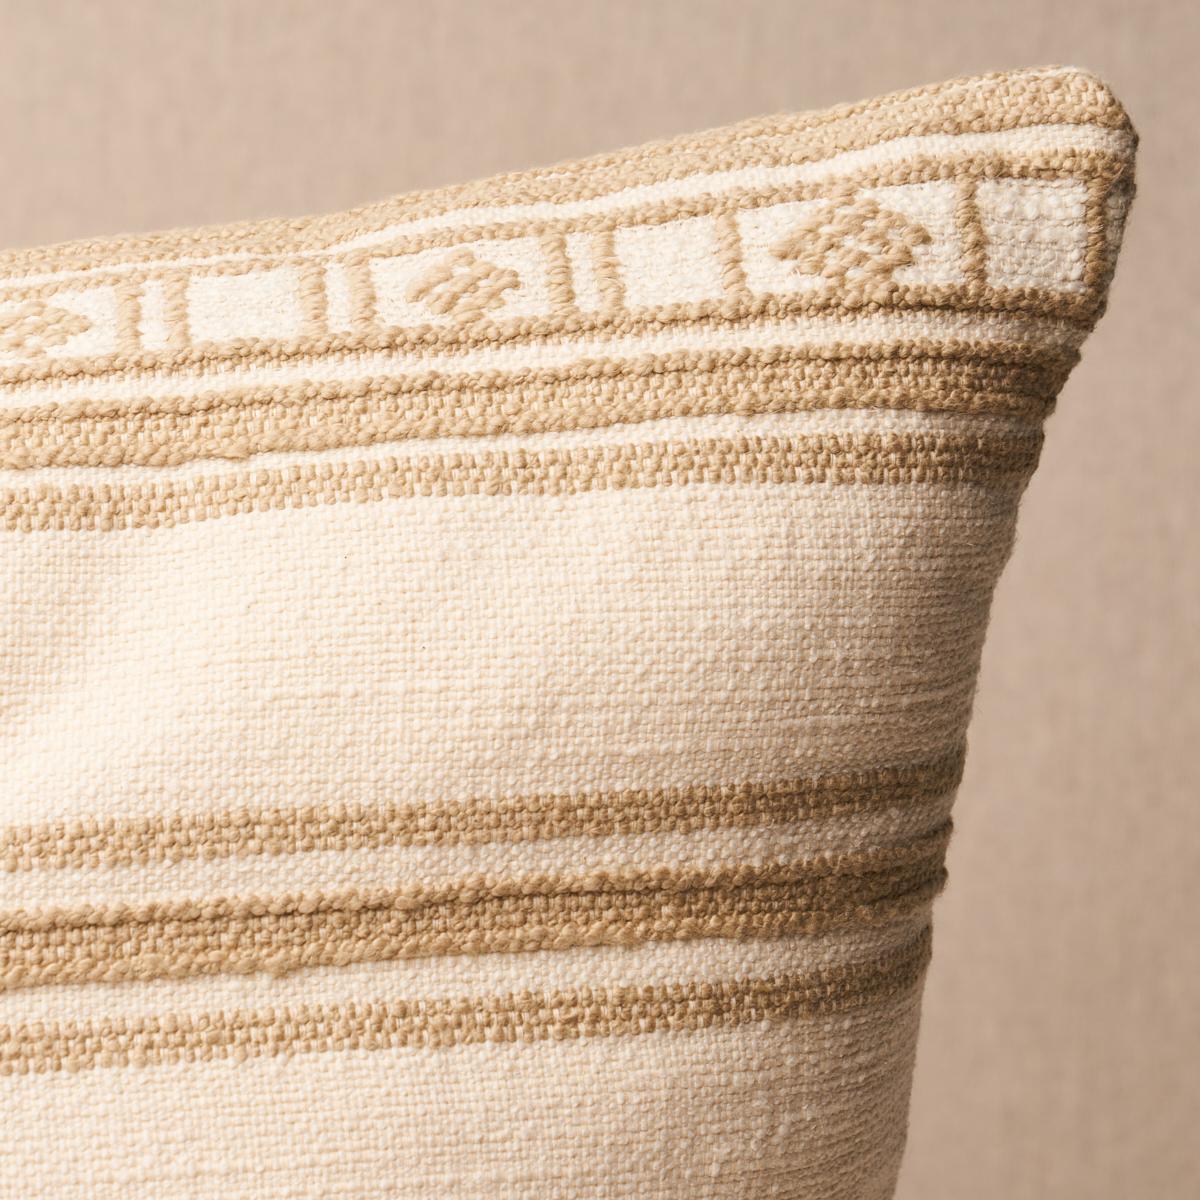 This pillow features Buena Vista with a knife edge finish. A wonderful, blanket-like woven stripe that's simple yet sophisticated, Buena Vista in wheat has a lovely hand and homespun appeal. Pillow includes a feather/down fill insert and hidden